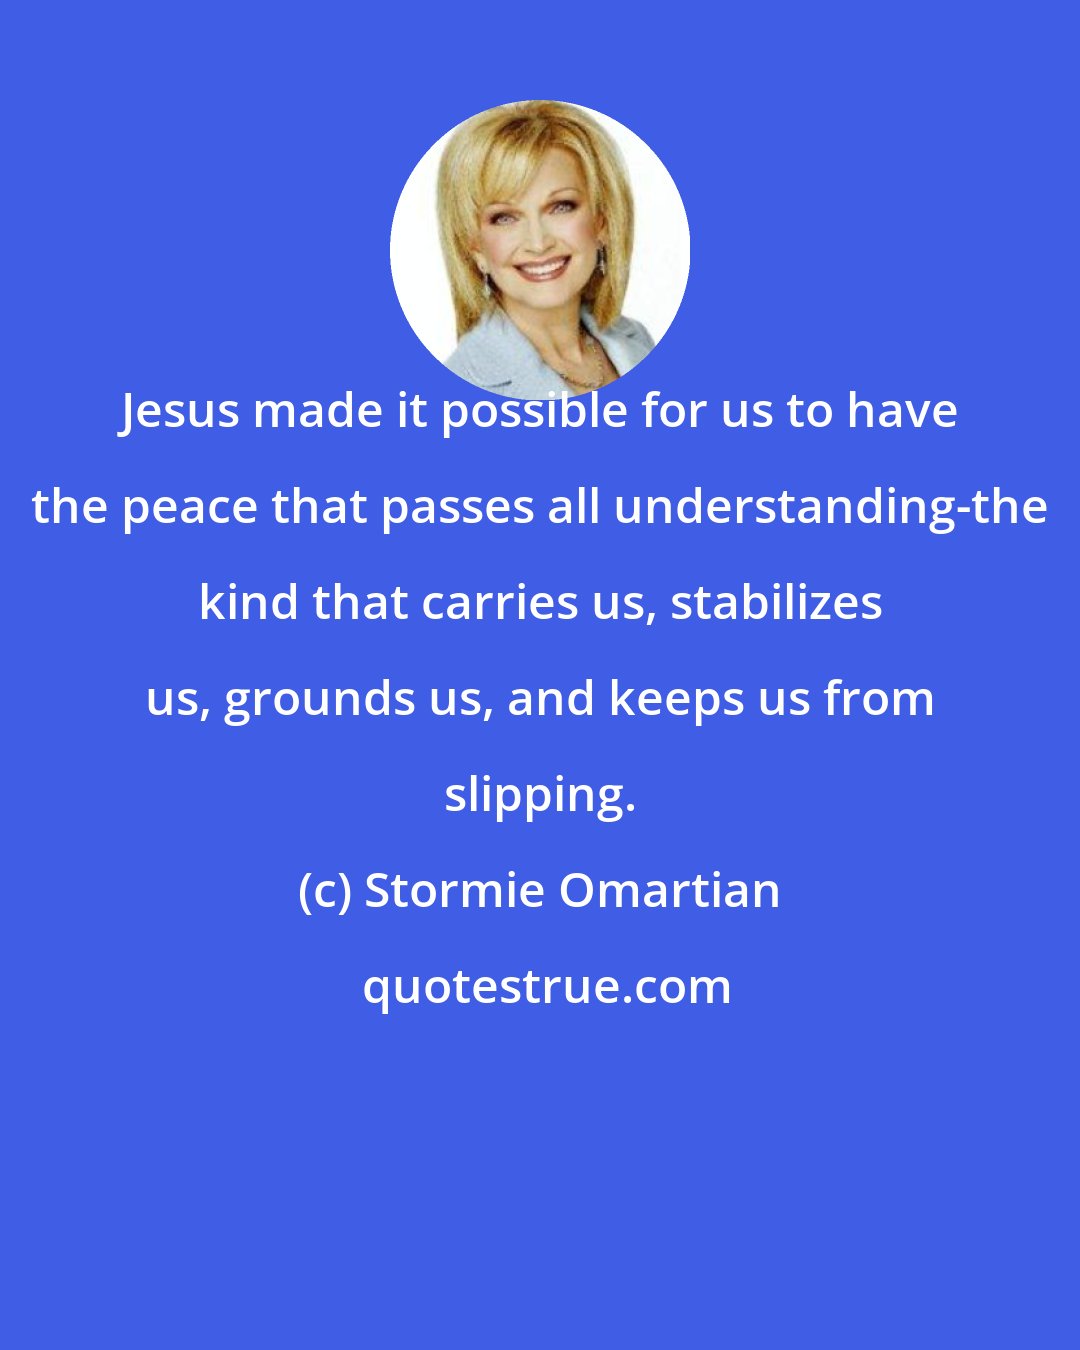 Stormie Omartian: Jesus made it possible for us to have the peace that passes all understanding-the kind that carries us, stabilizes us, grounds us, and keeps us from slipping.